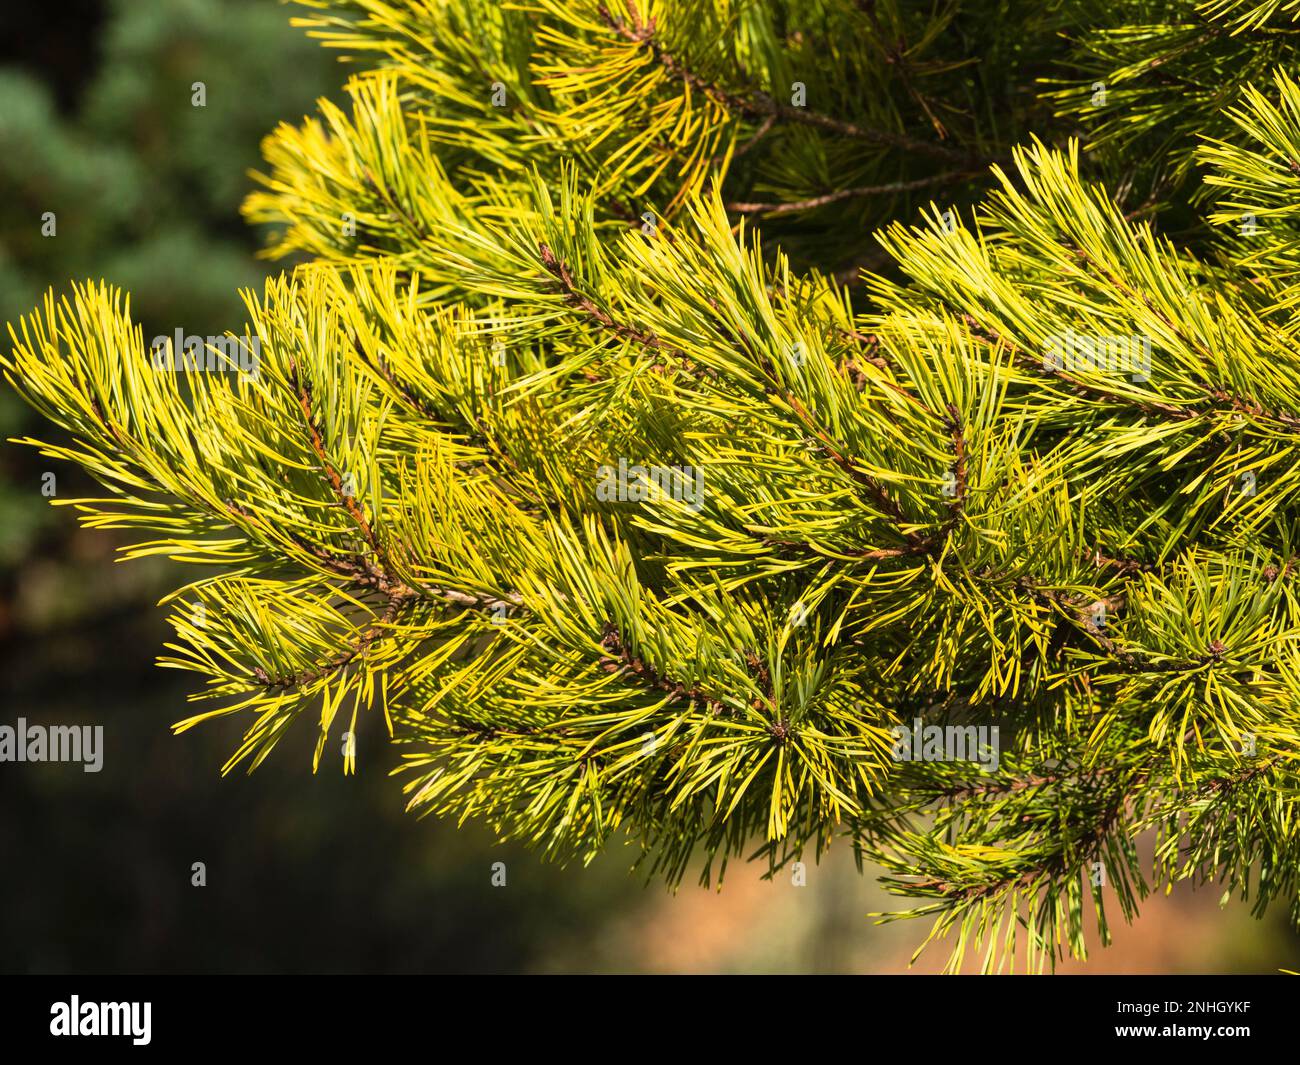 Golden winter needles of the ornamental variety of Scot's Pine, Pinus syvestris 'Gold Coin' Stock Photo